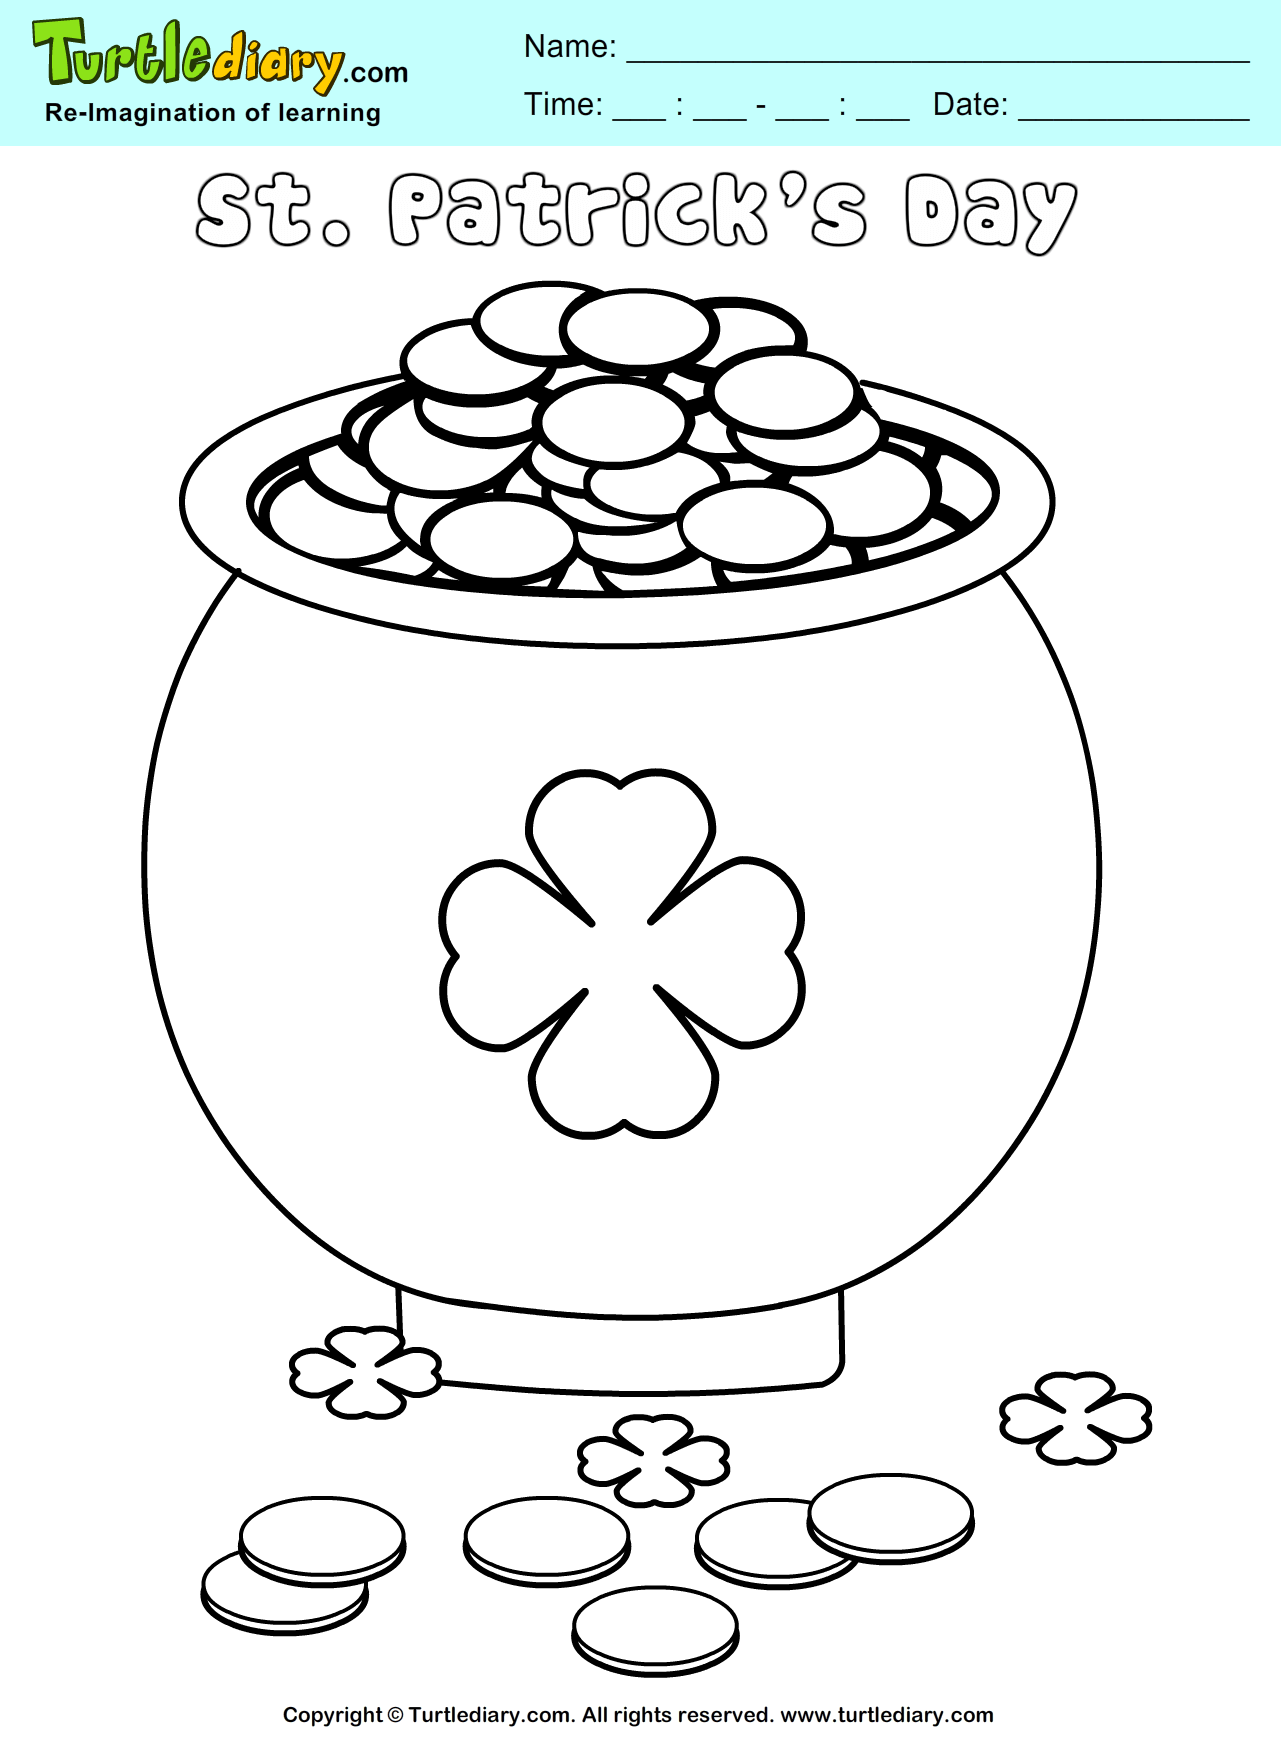 Pot of gold coloring sheet turtle diary